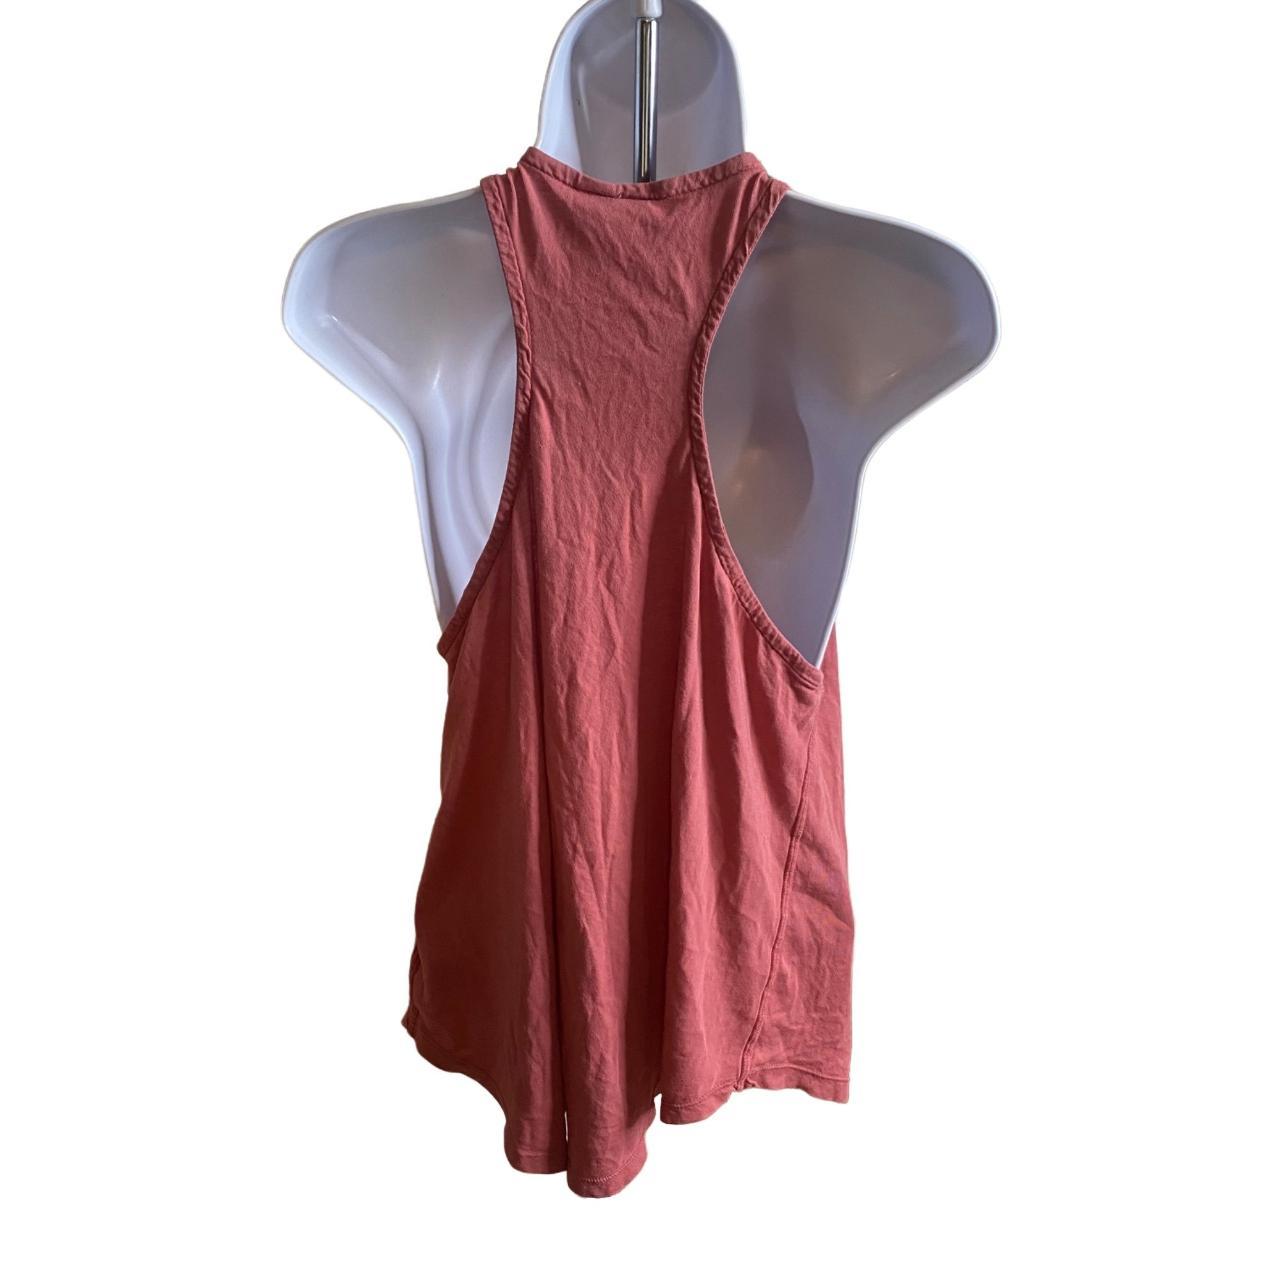 Product Image 4 - KENJI TANK

DISTRESSED RED

100% COTTON

SIZE L

HIGH